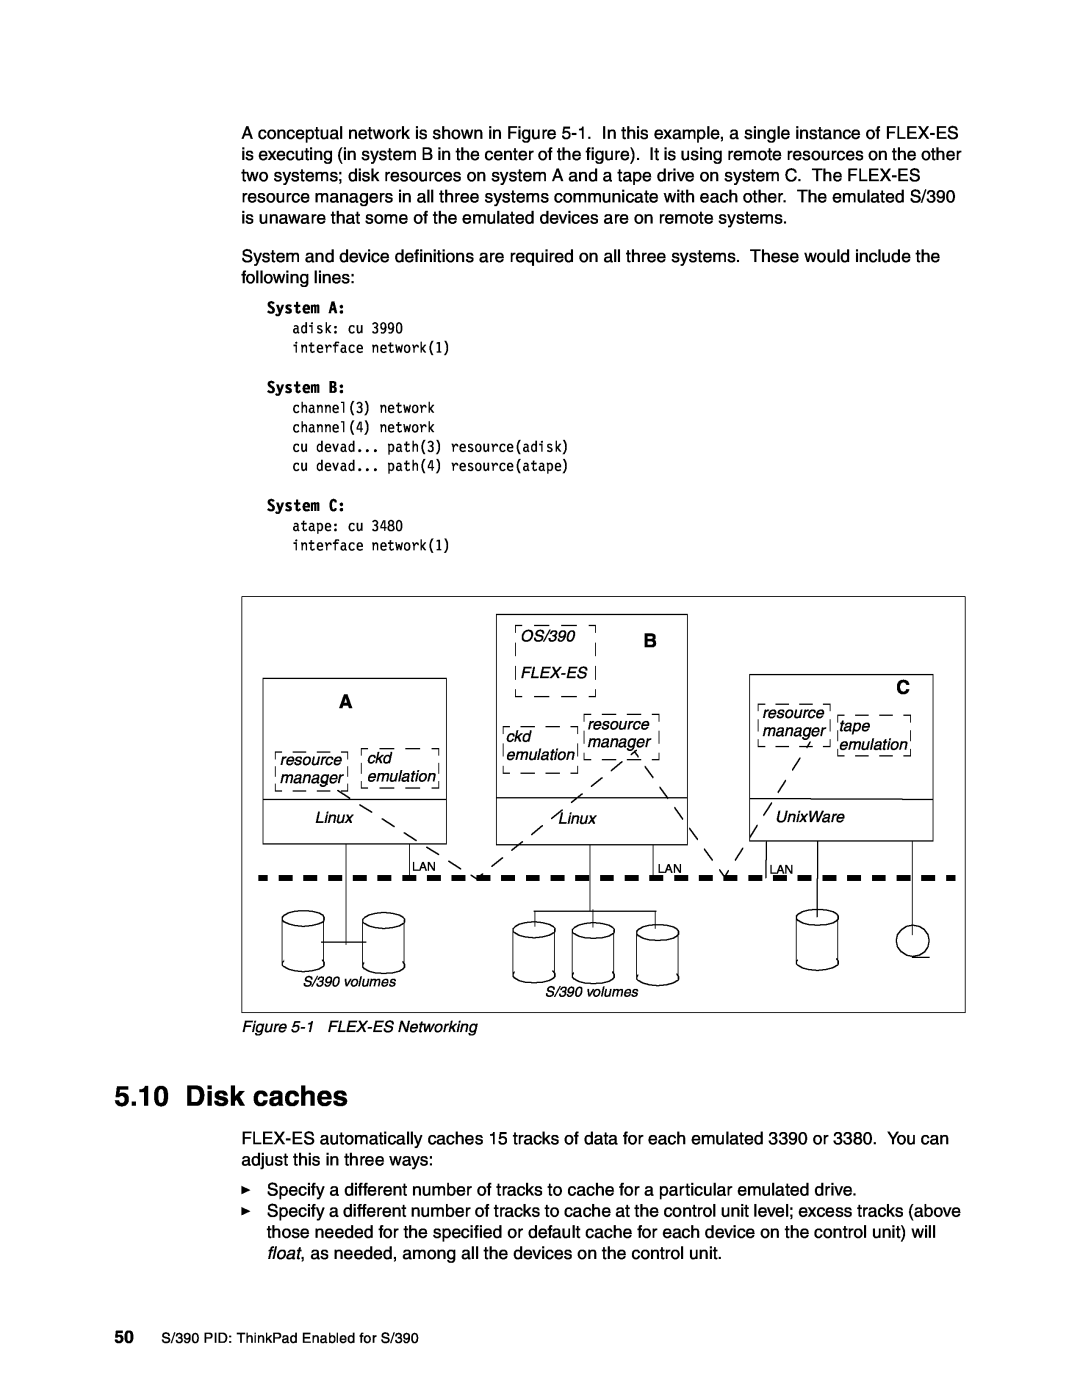 IBM s/390 manual Disk caches, System A, System B, System C 